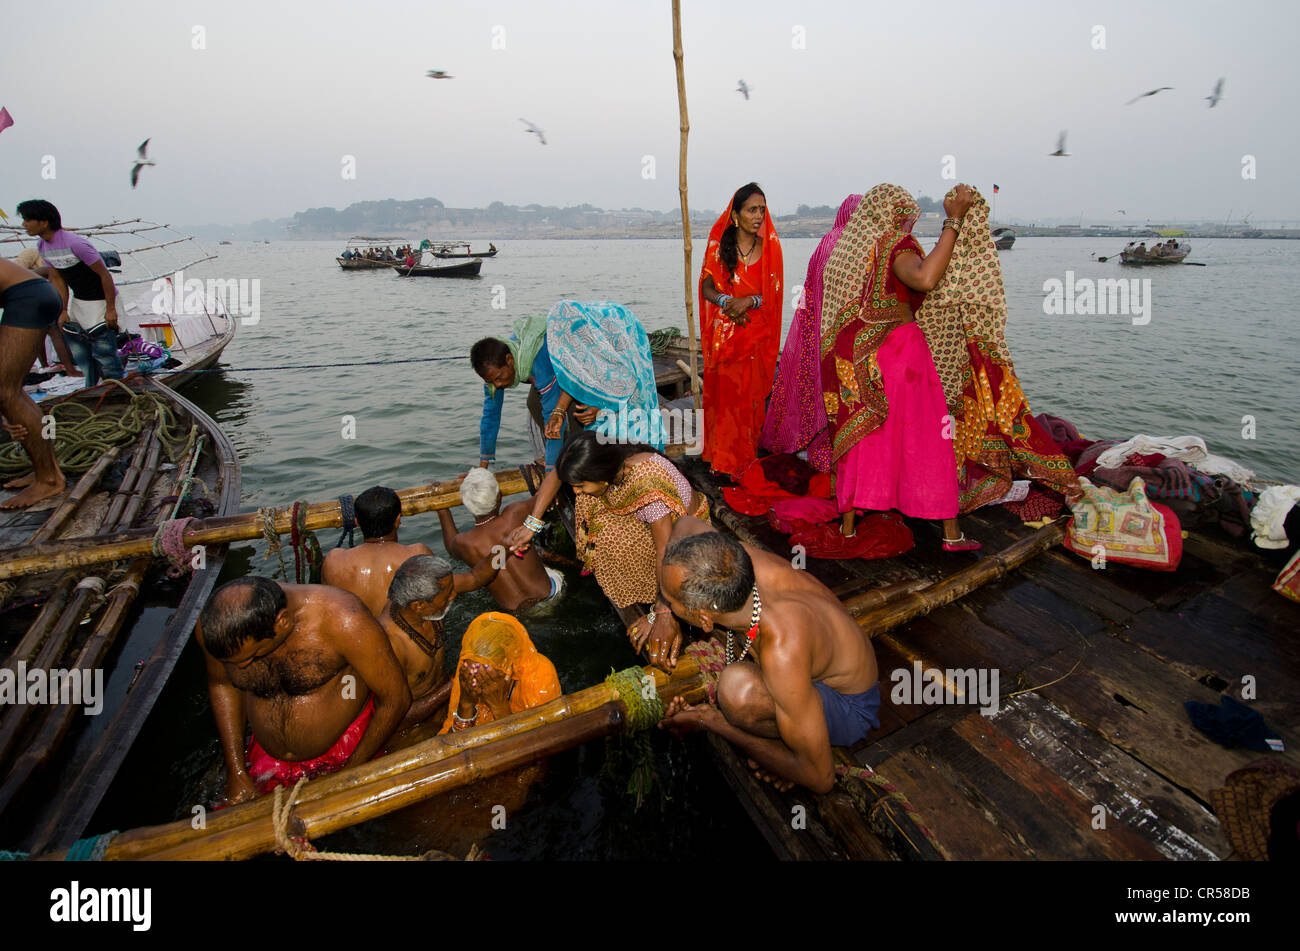 Pilgrims taking their holy dip in the water at Sangam, the confluence of the holy rivers Ganges, Yamuna and Saraswati, in Stock Photo